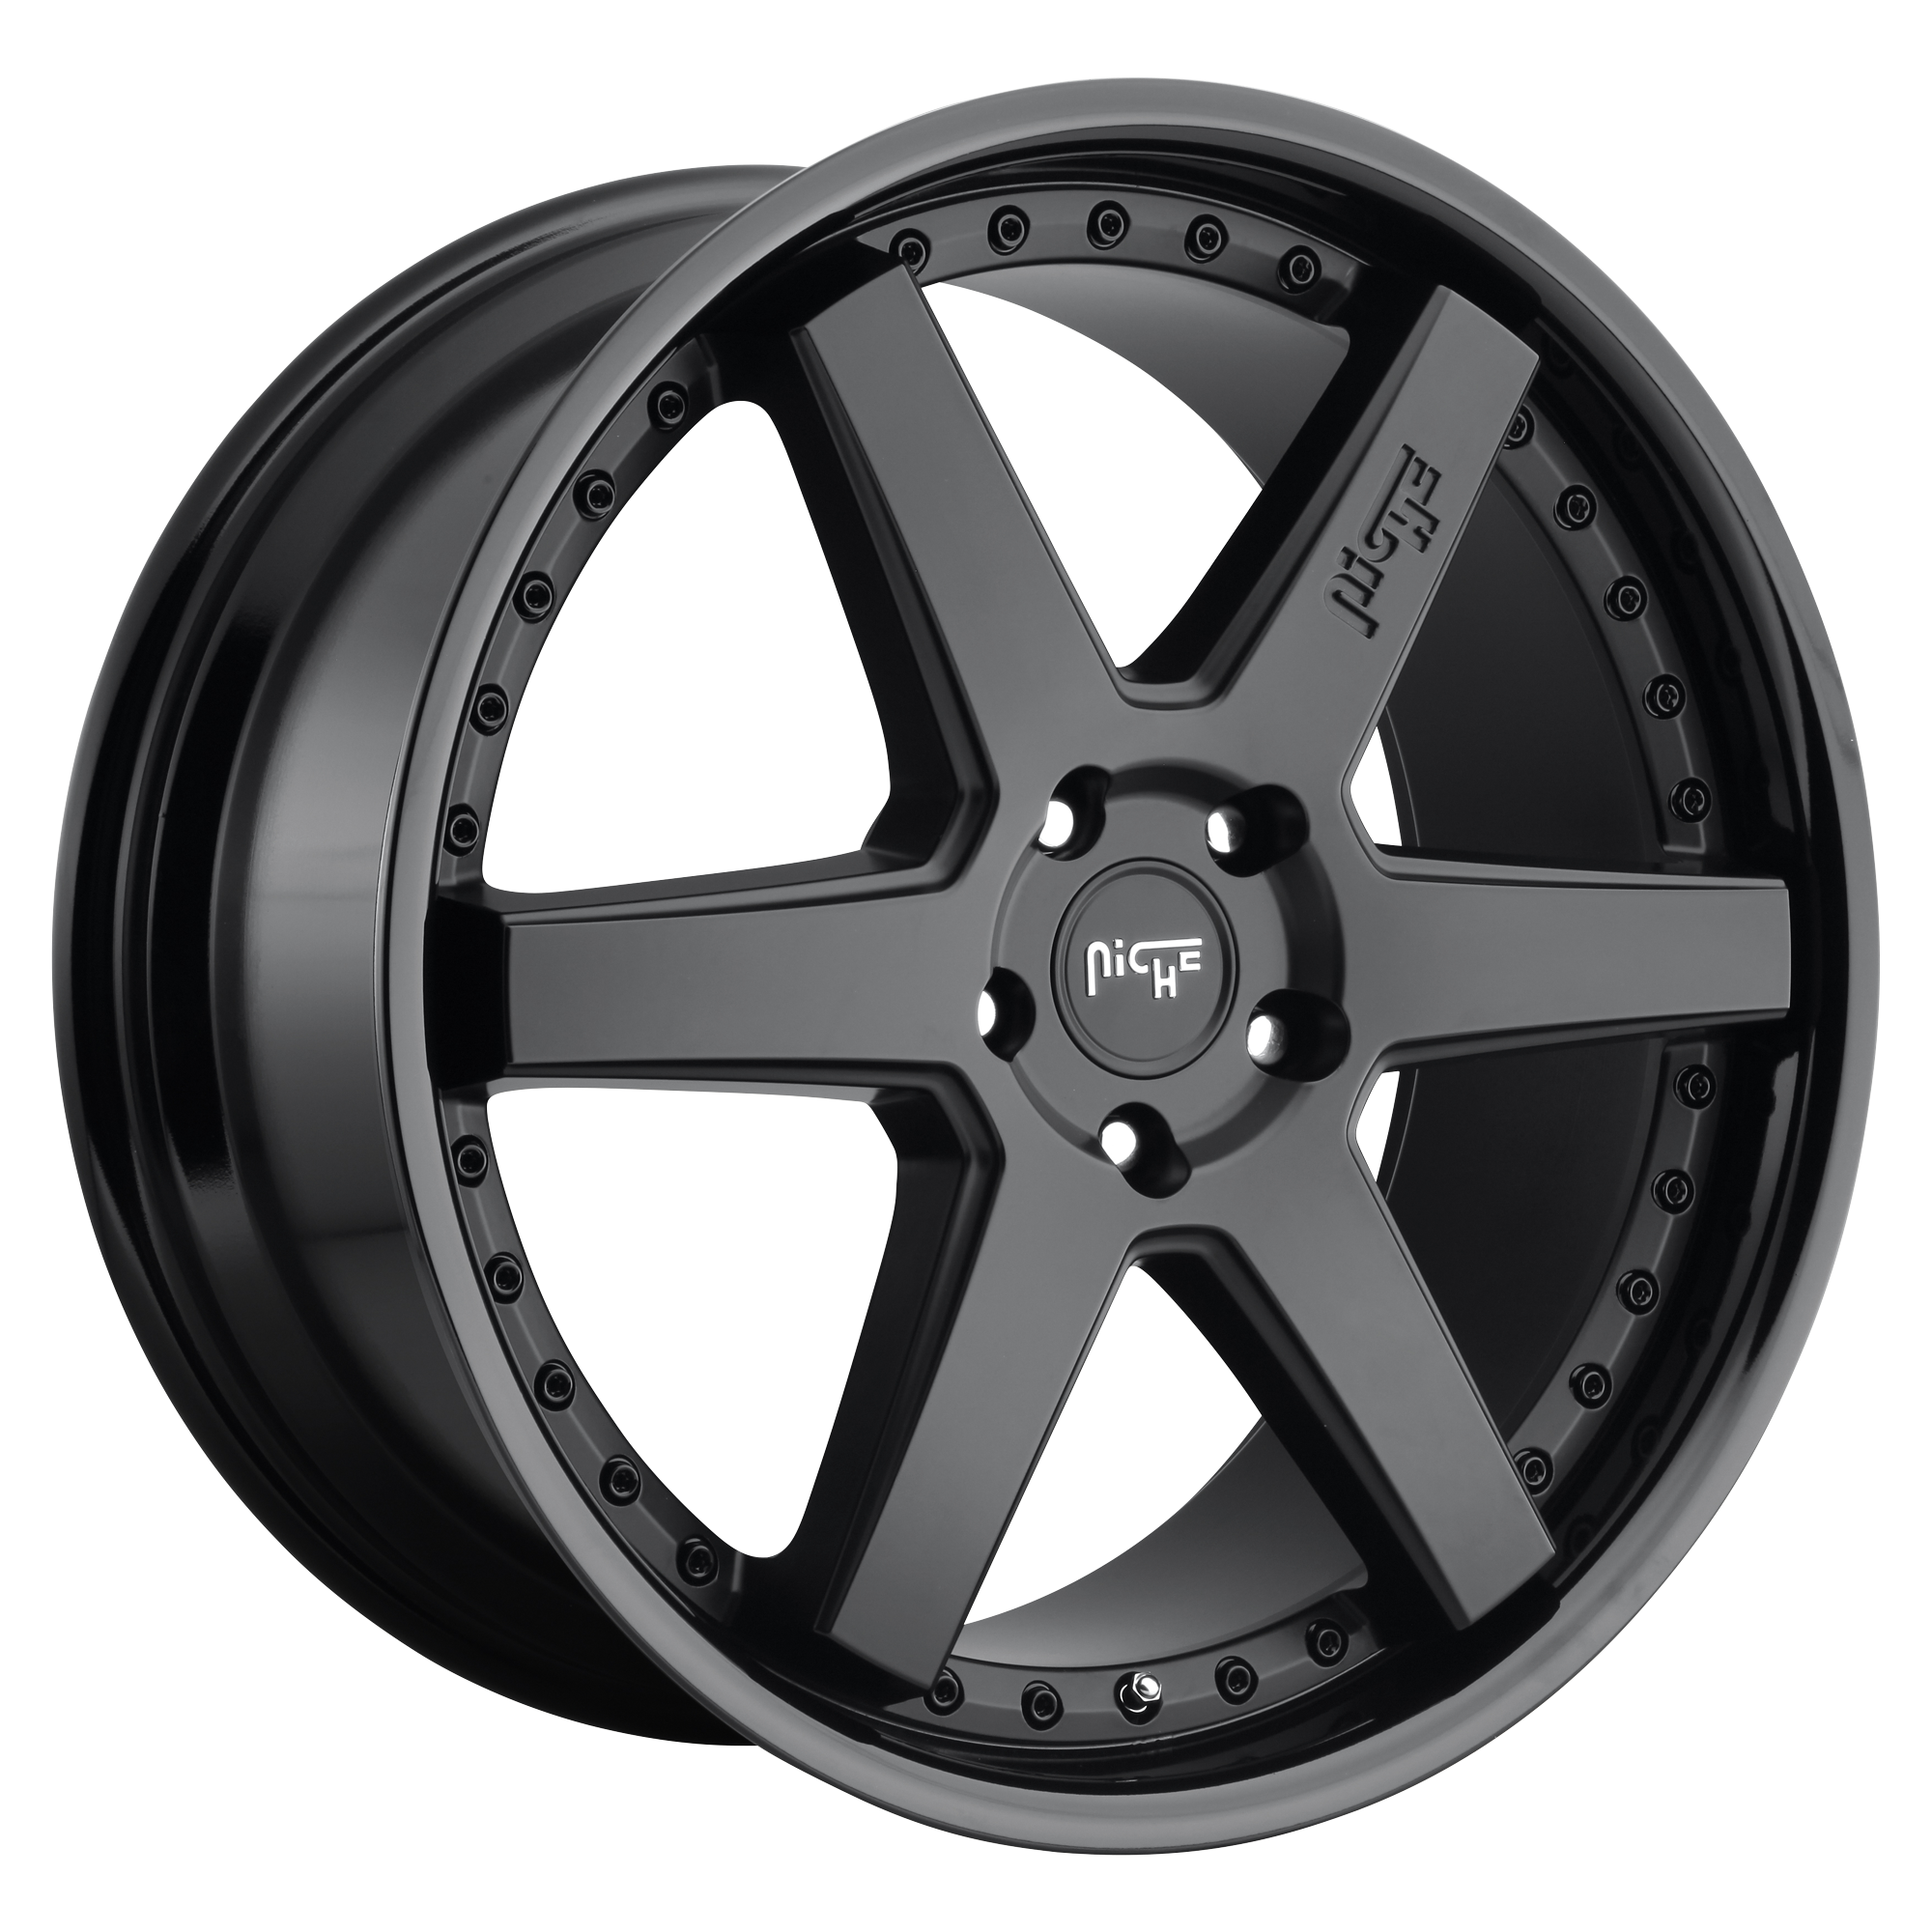 ALTAIR 18x9.5 5x114.30 GLOSS BLACK MATTE BLACK (35 mm) - Tires and Engine Performance